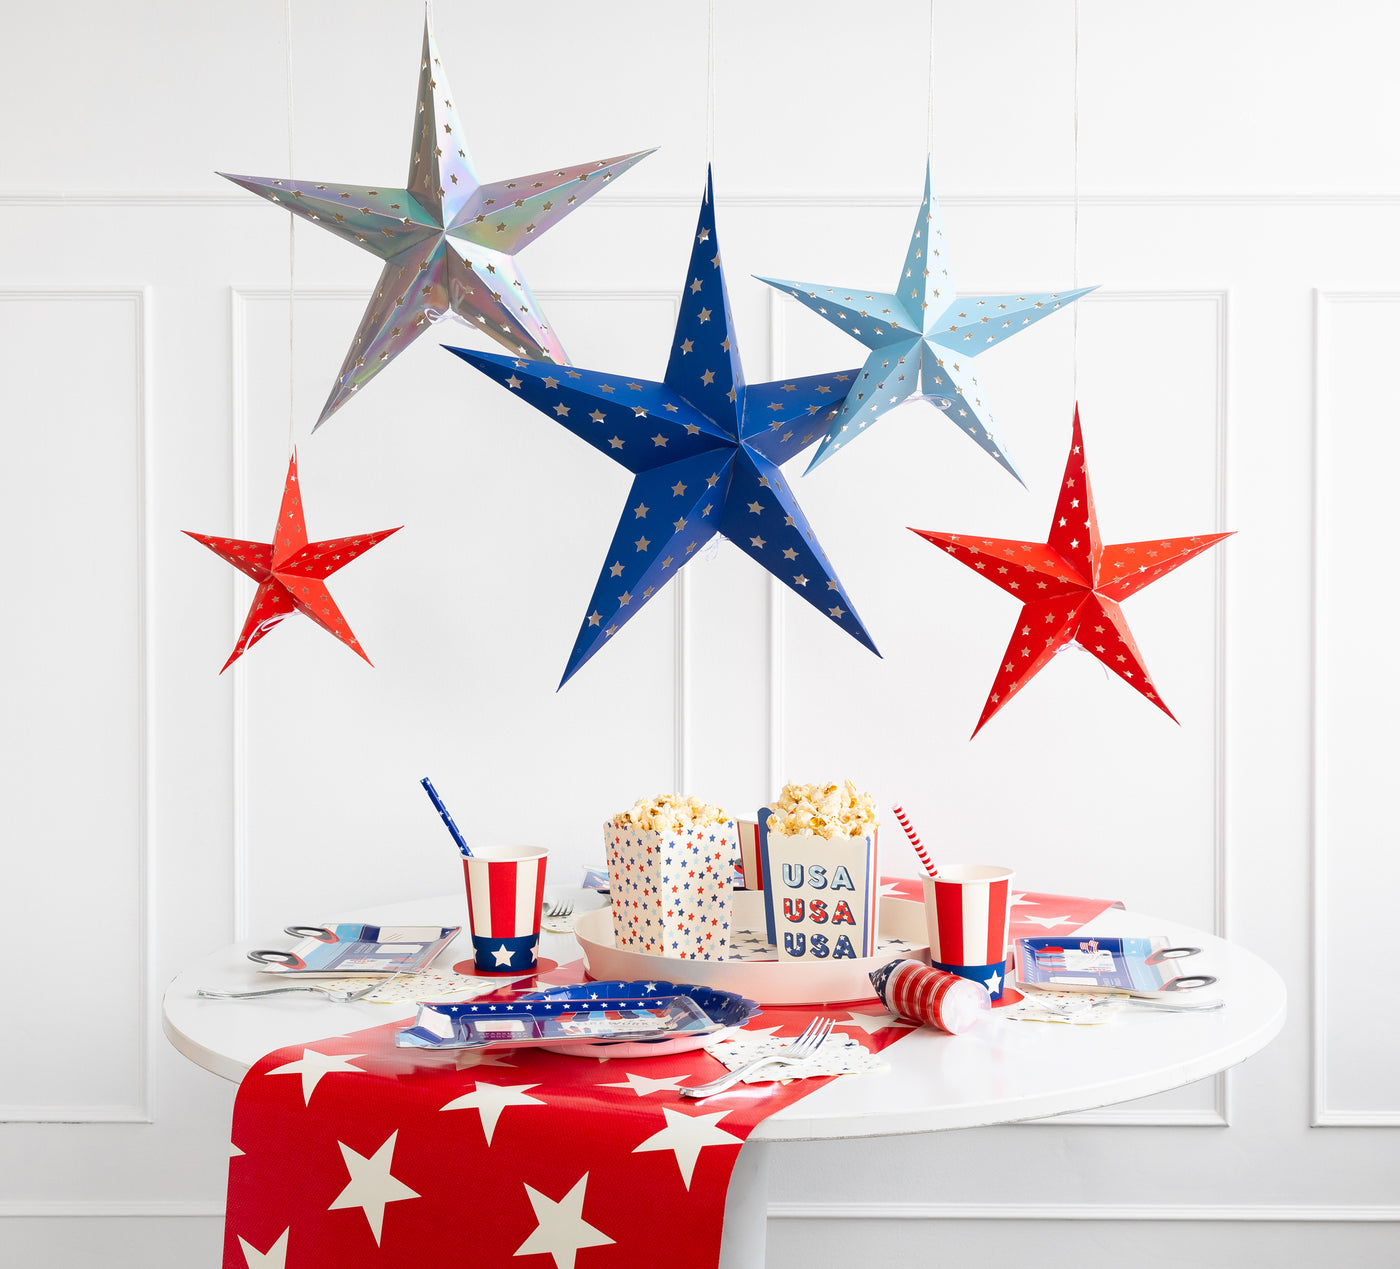 SPARKLERS AND ROCKETS DECOR COLLECTION KIT